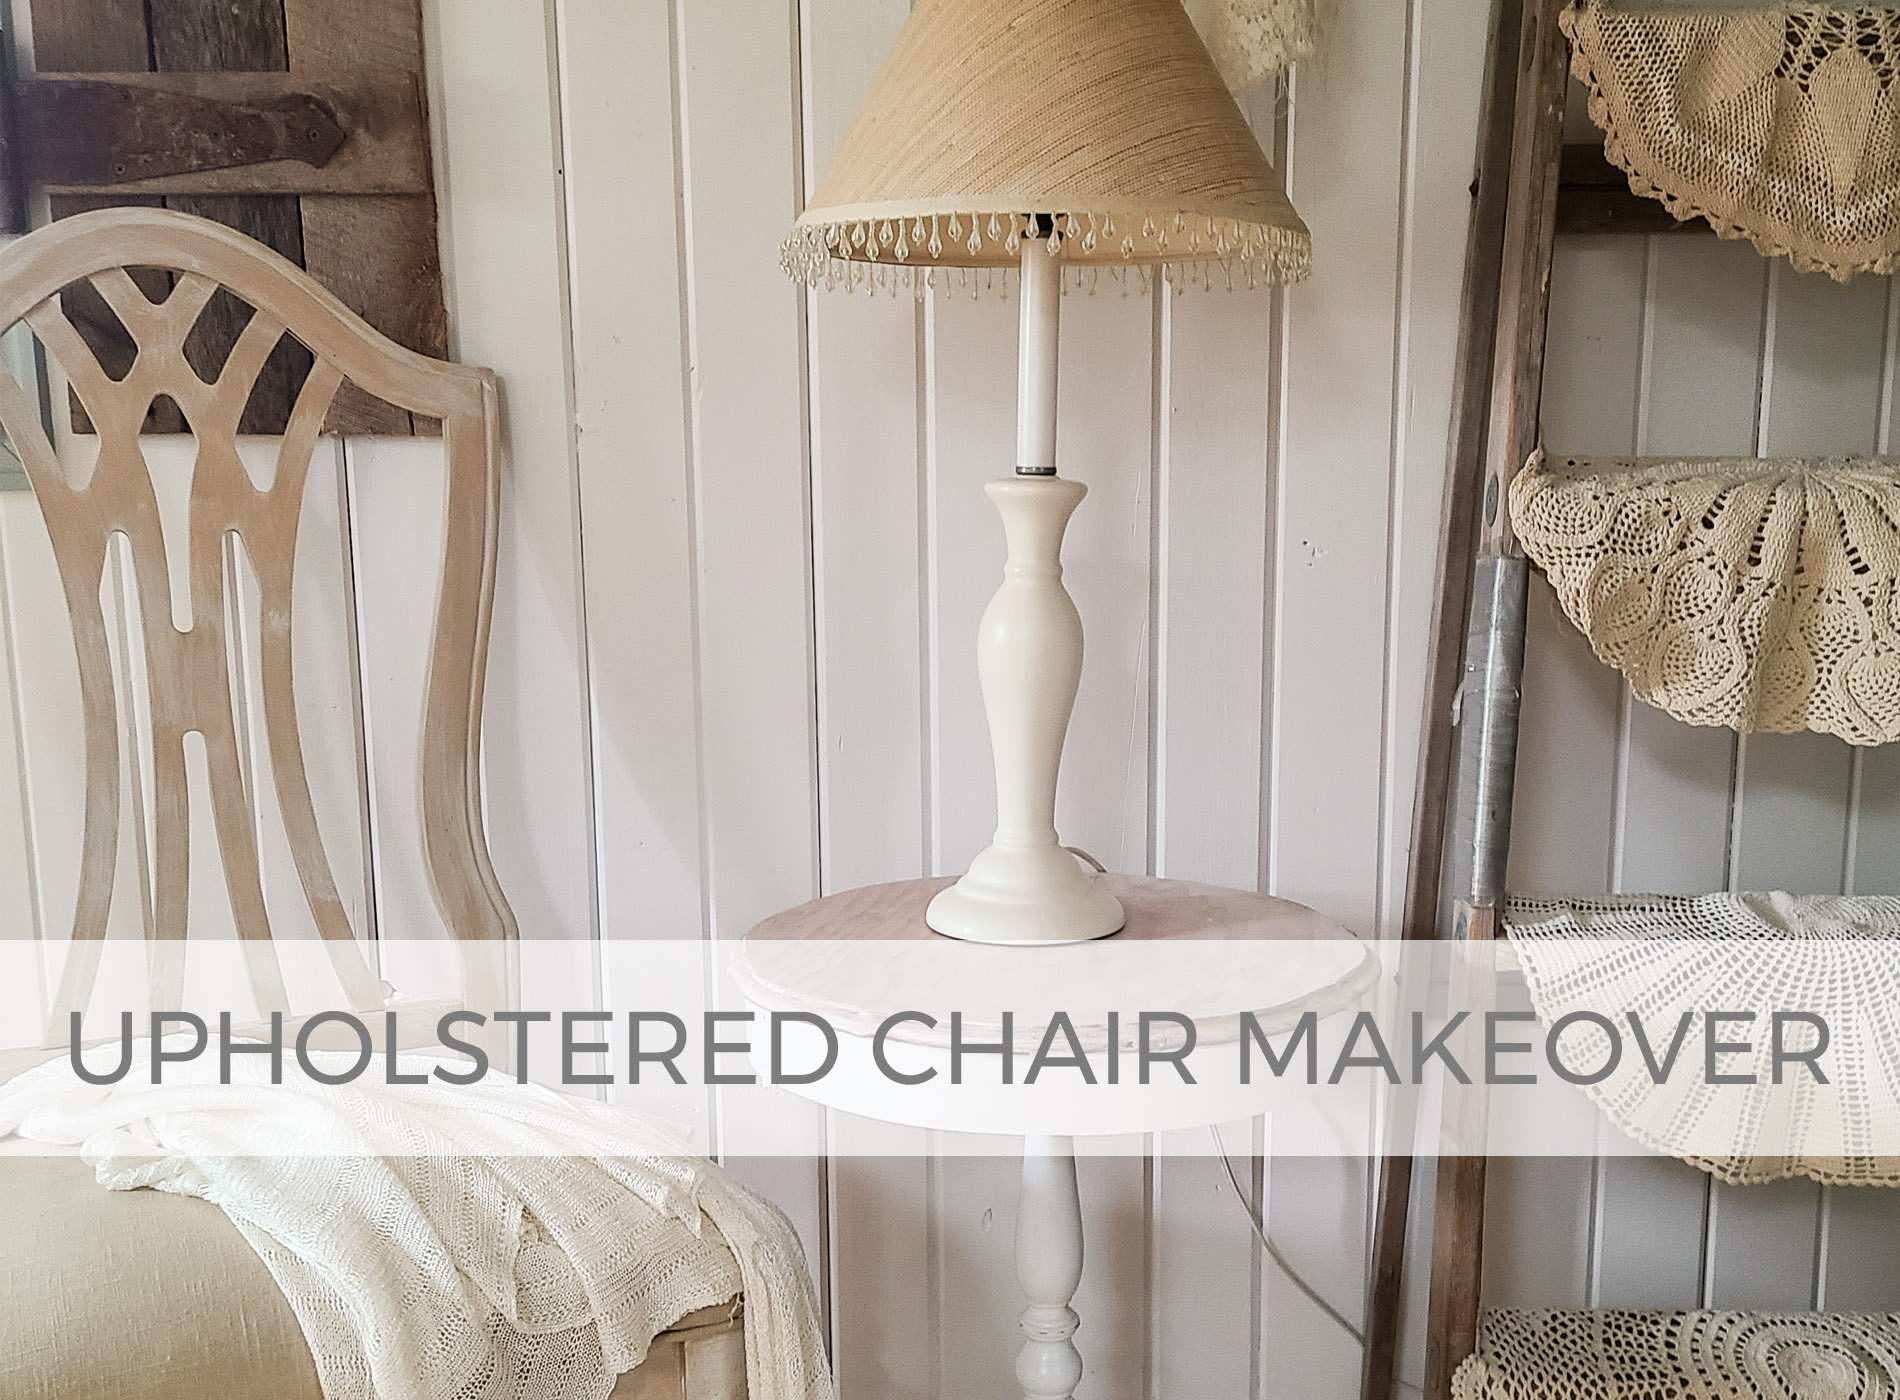 Upholstered Chair Makeover by Larissa of Prodigal Pieces | prodigalpieces.com #prodigalpieces